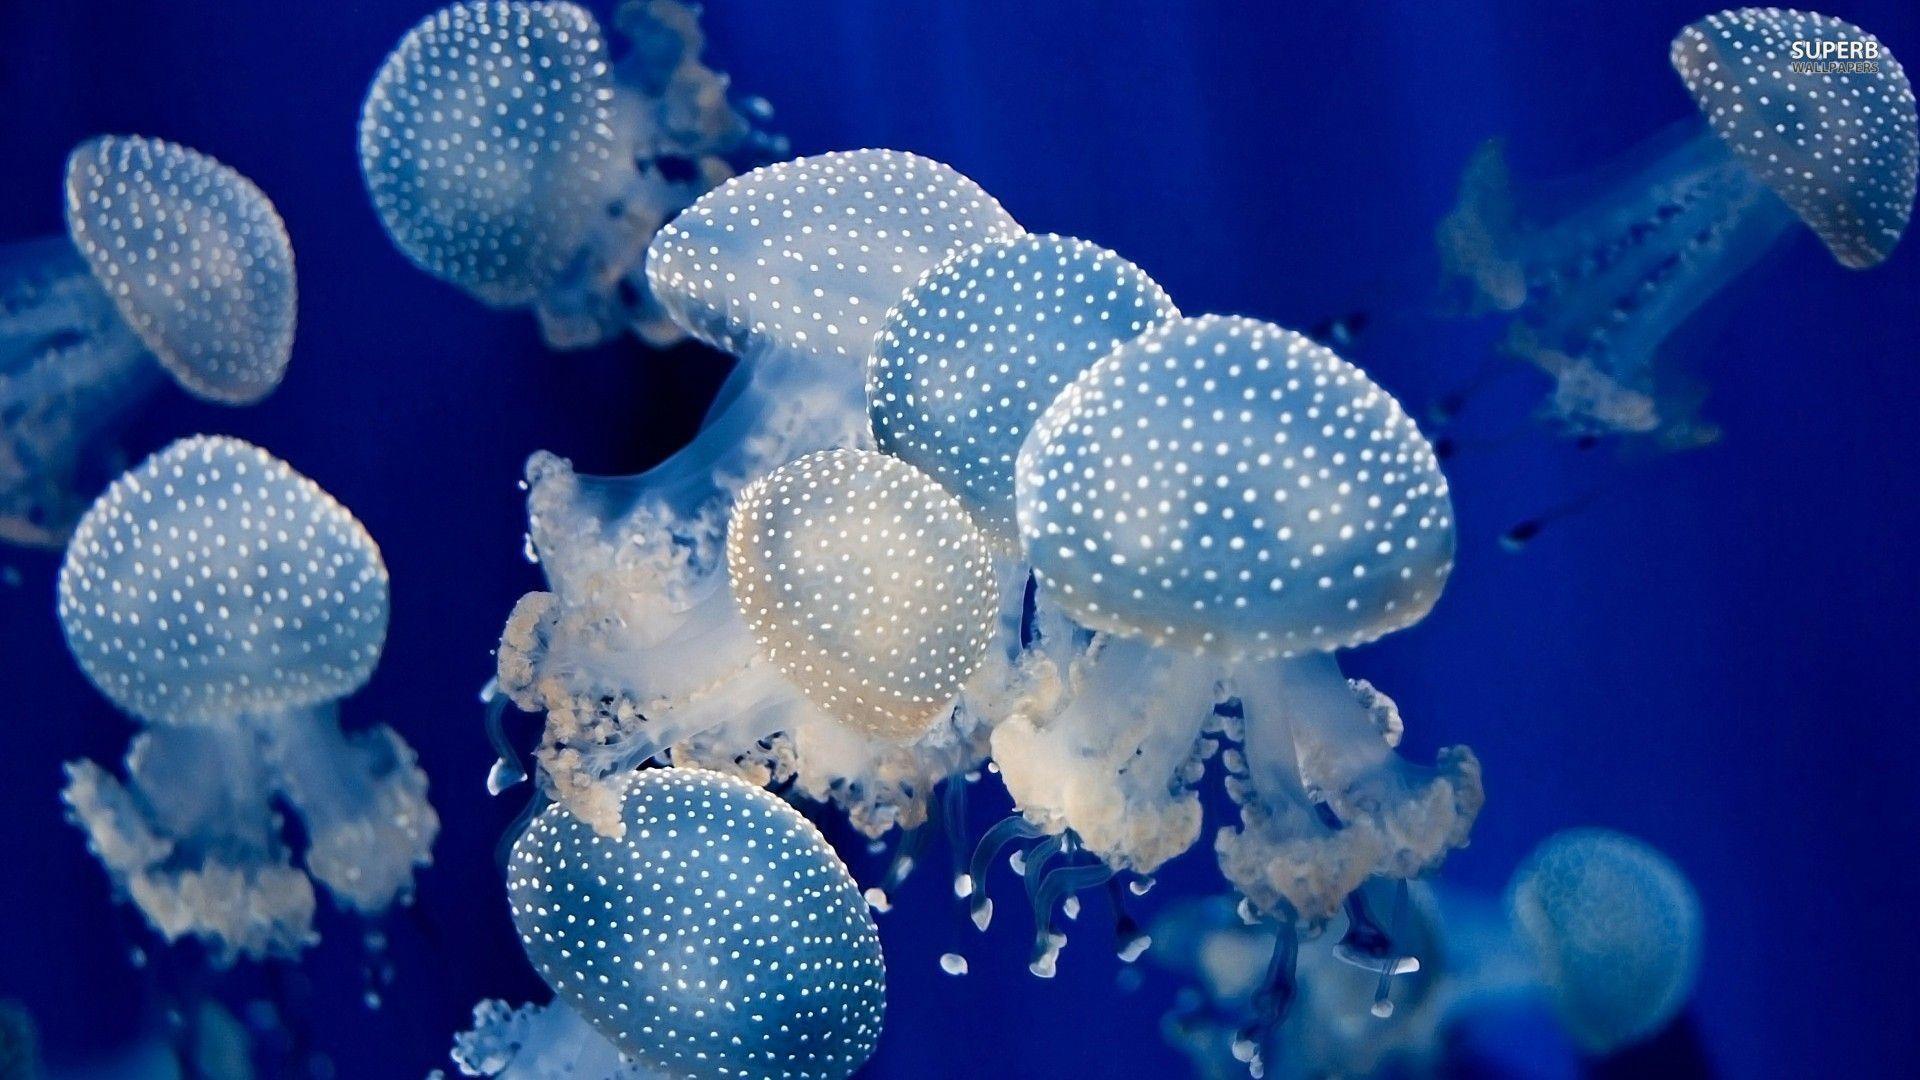 Awesome Jellyfish Picture and Wallpaper